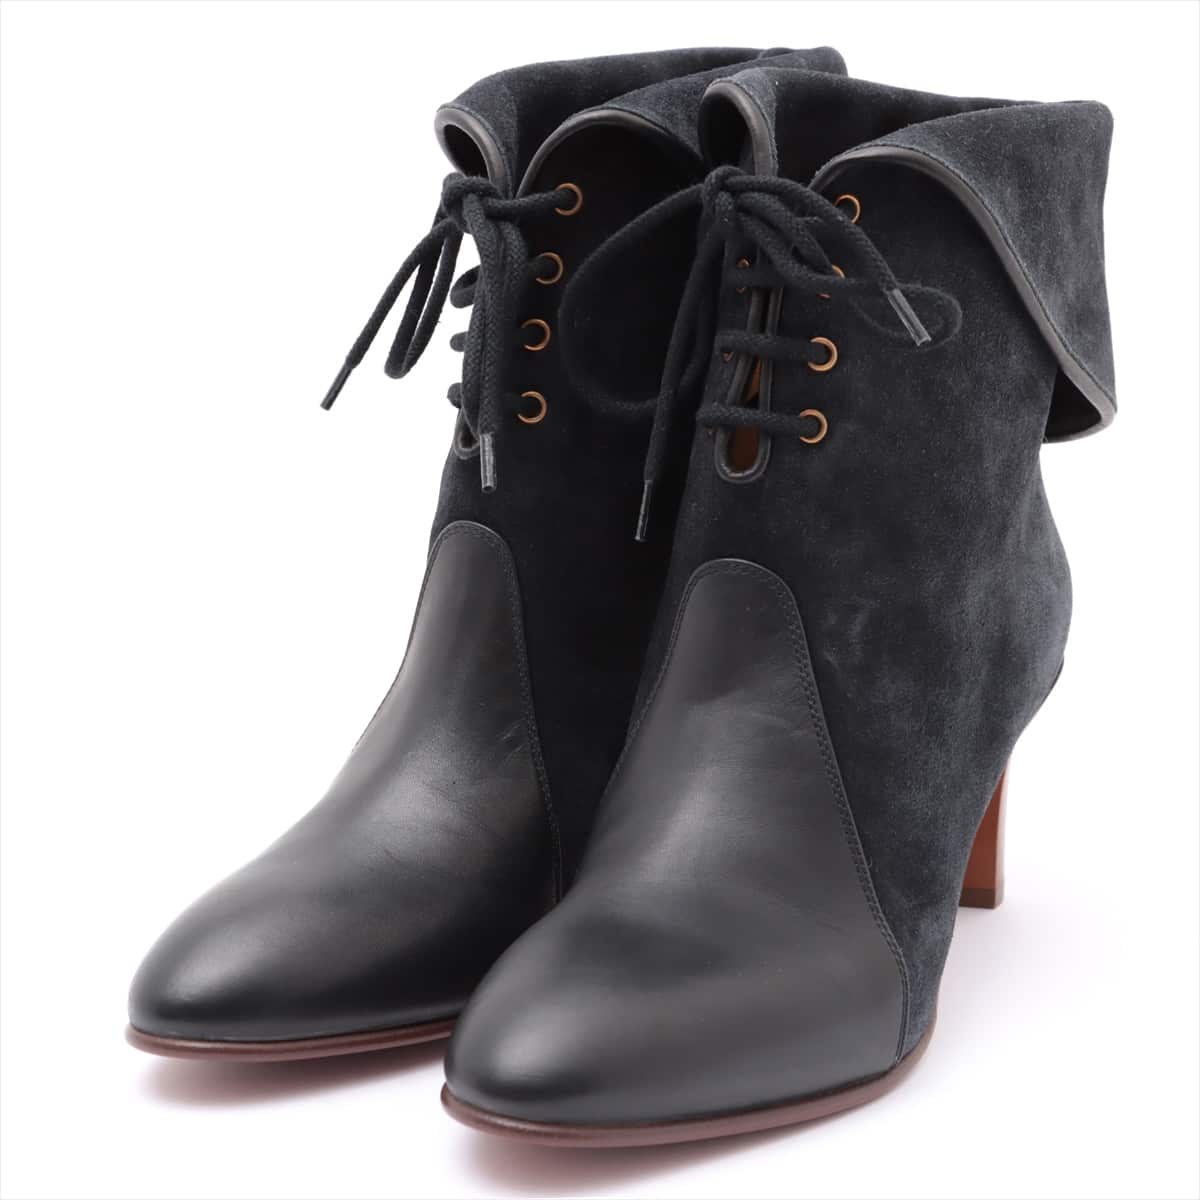 Chloe Suede & Leather Short Boots 36 Ladies' Black x Gray